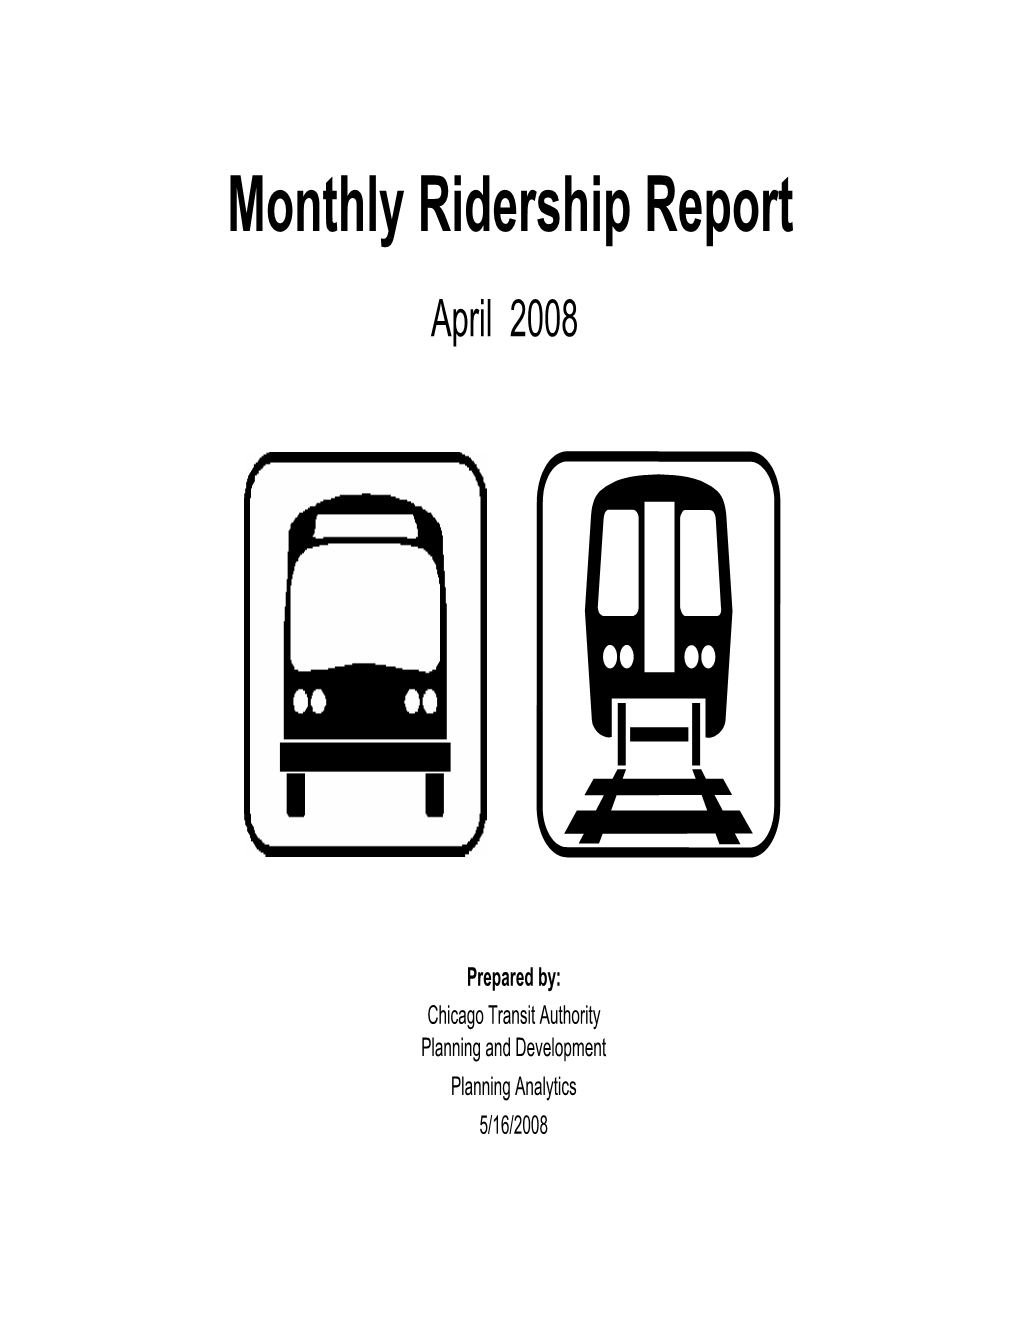 Monthly Ridership Report April 2008